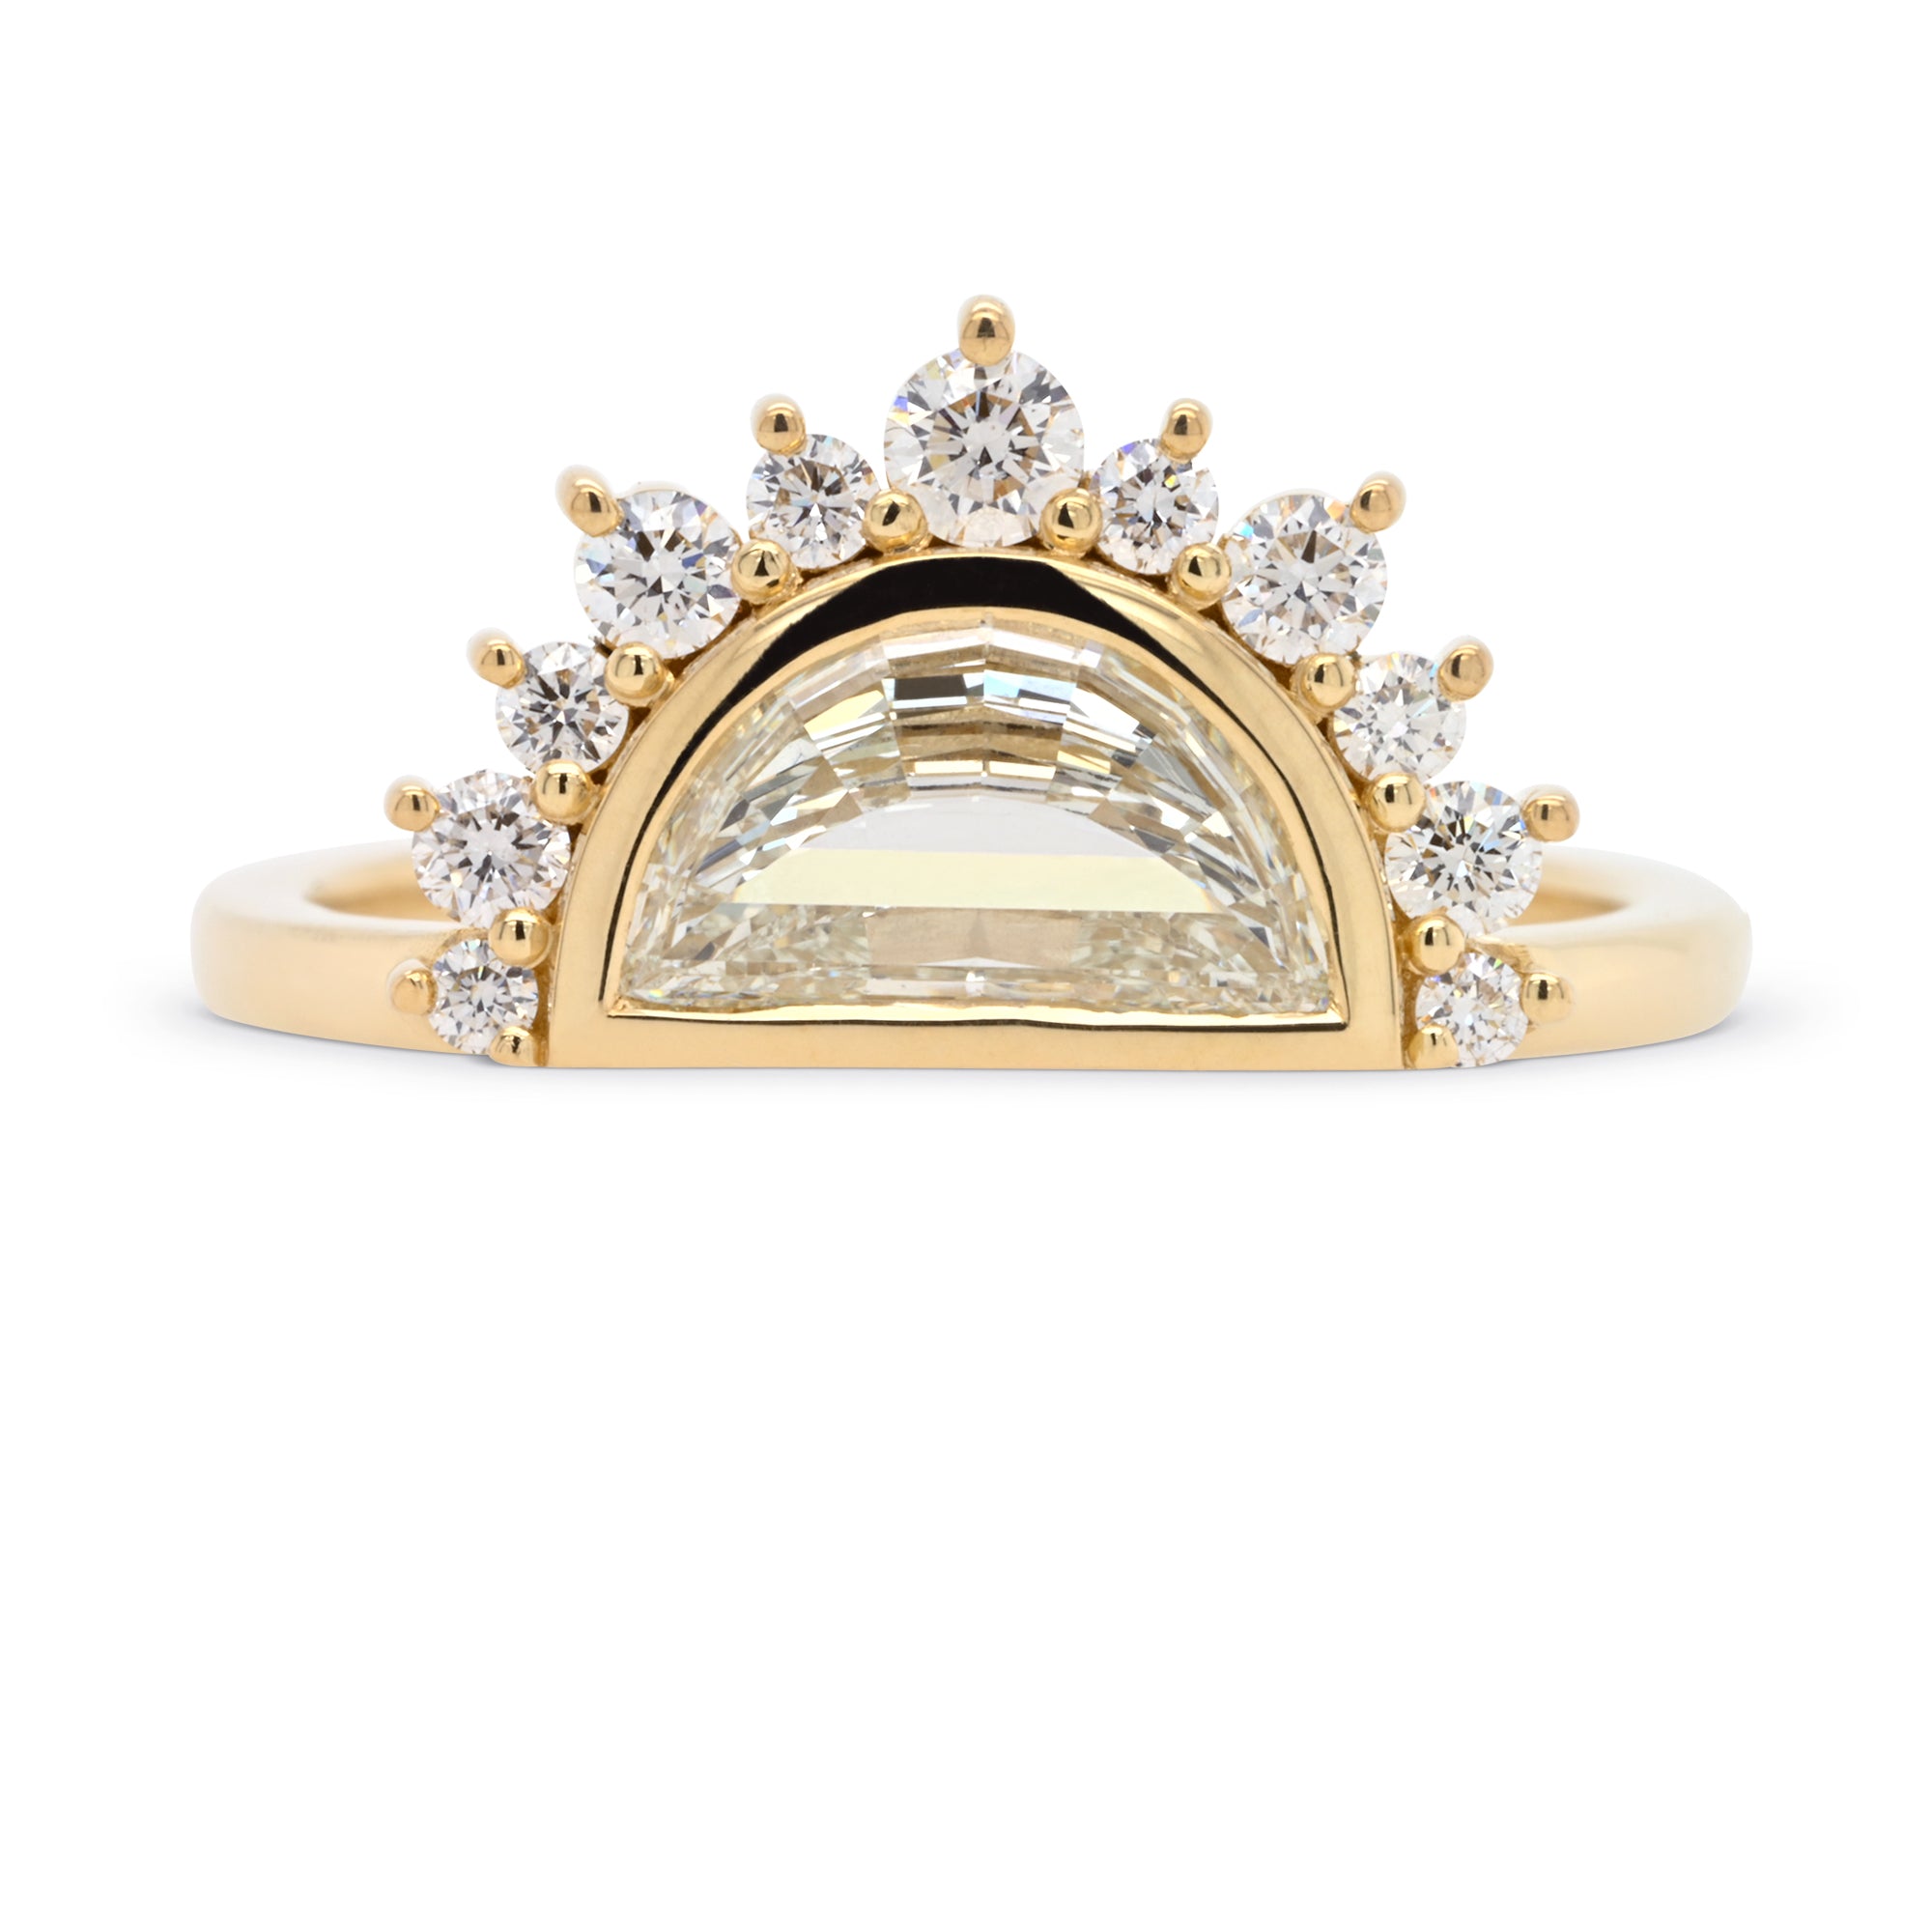 Half moon diamond engagement ring in a unique 14k yellow gold halo setting